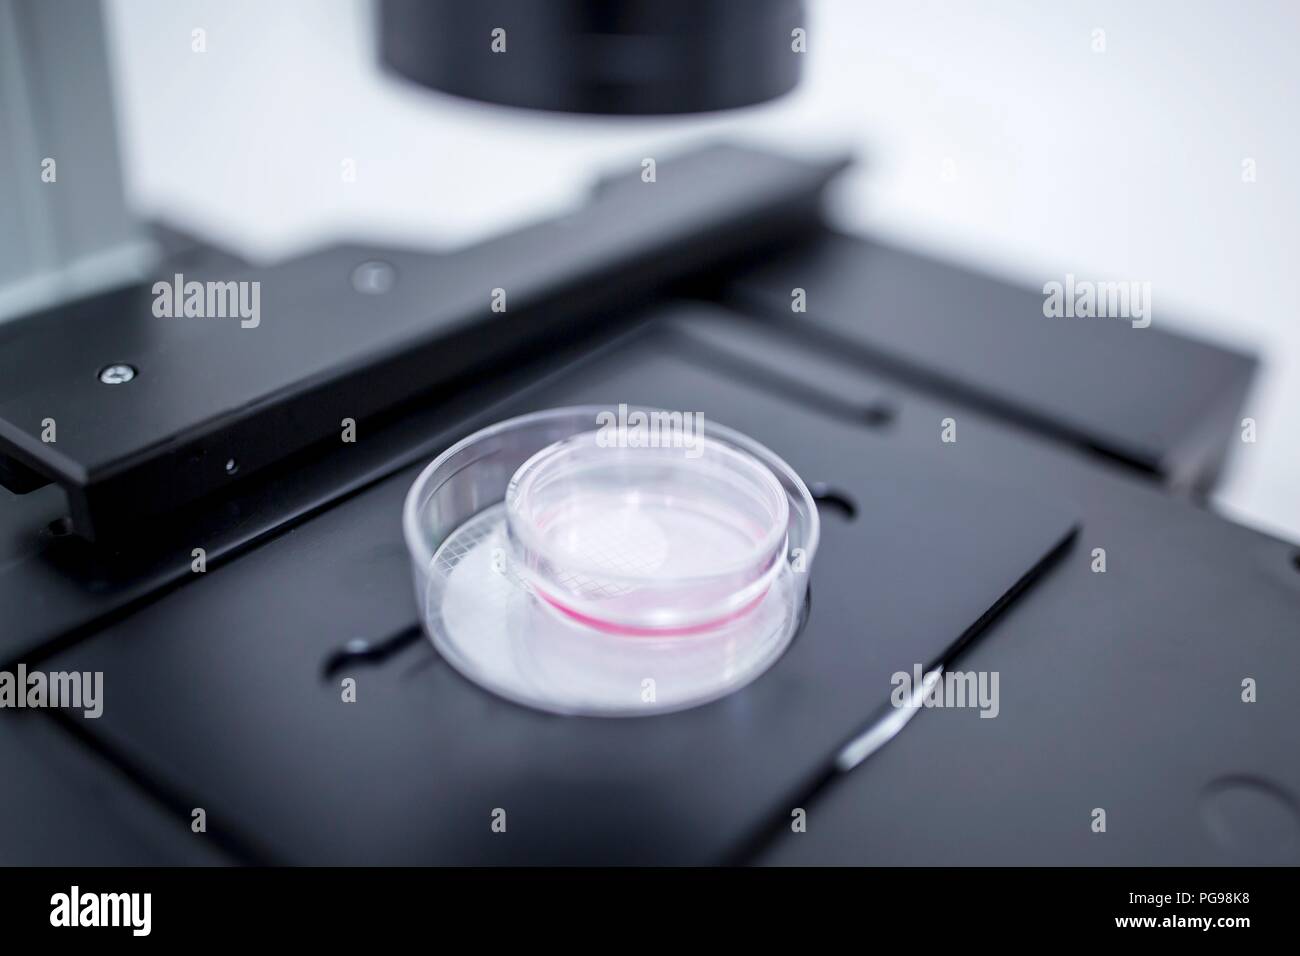 Examining cultured cells under a microscope. Stock Photo